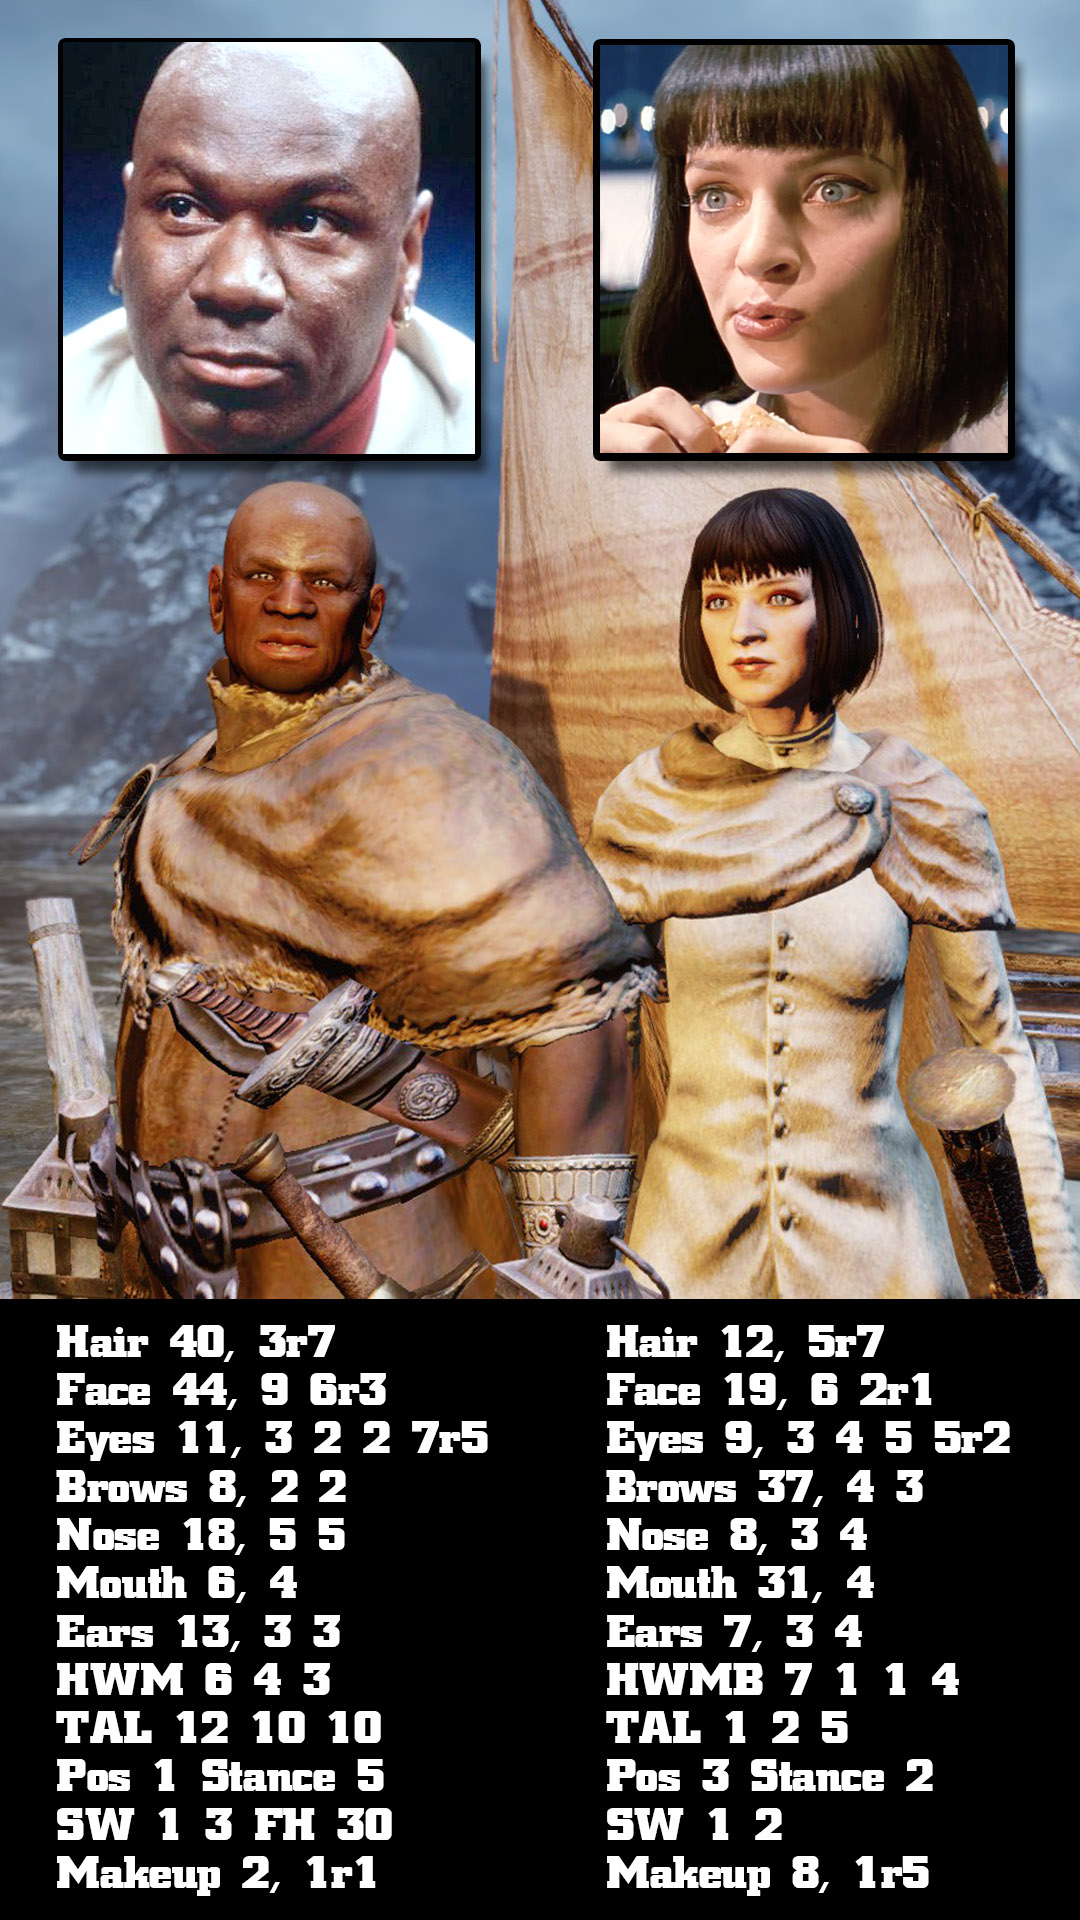 Dragon Dogma Dark Arisen - dragon's dogma character sliders - Hair 40, 3r7 Face 44, 9 Gr3 Eyes 11, 3 2 2 7r5 Brows 8, 22 Nose 18, 55 Mouth 6, 4 Ears 13, 33 Hwm 6 4 3 Tal 12 10 10 Pos 1 Stance 5 Sw 1 3 Fh 30 Makeup 2, 1r1 Hair 12, 5r7 Face 19, 821 Eyes 9, 